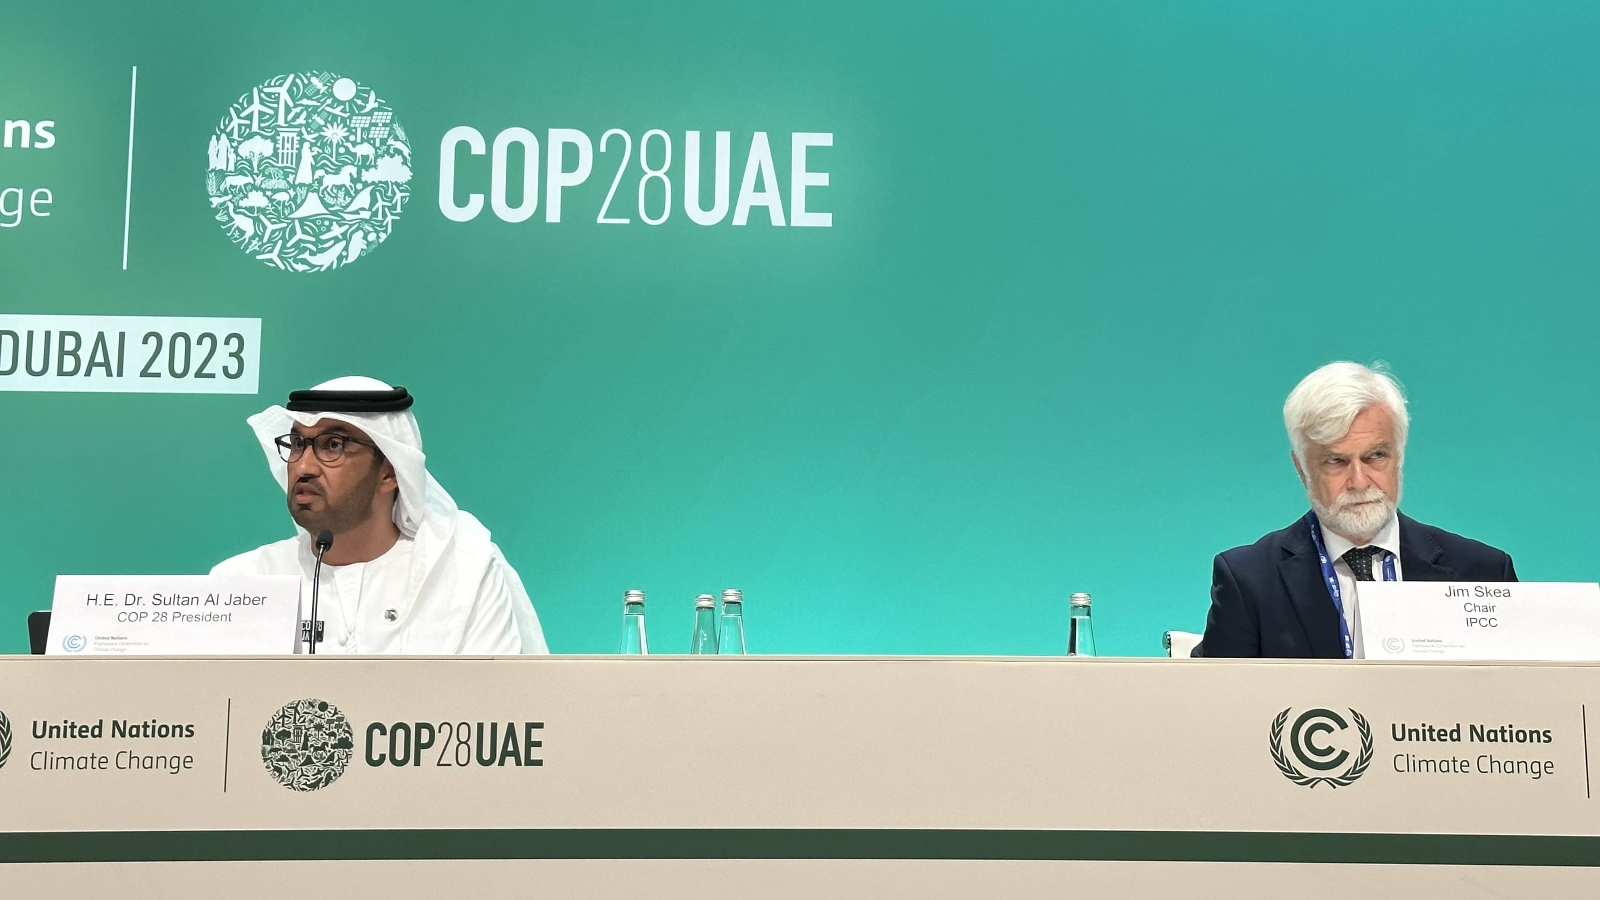 Two men are seated at a panel in front of a green background that says COP28UAE